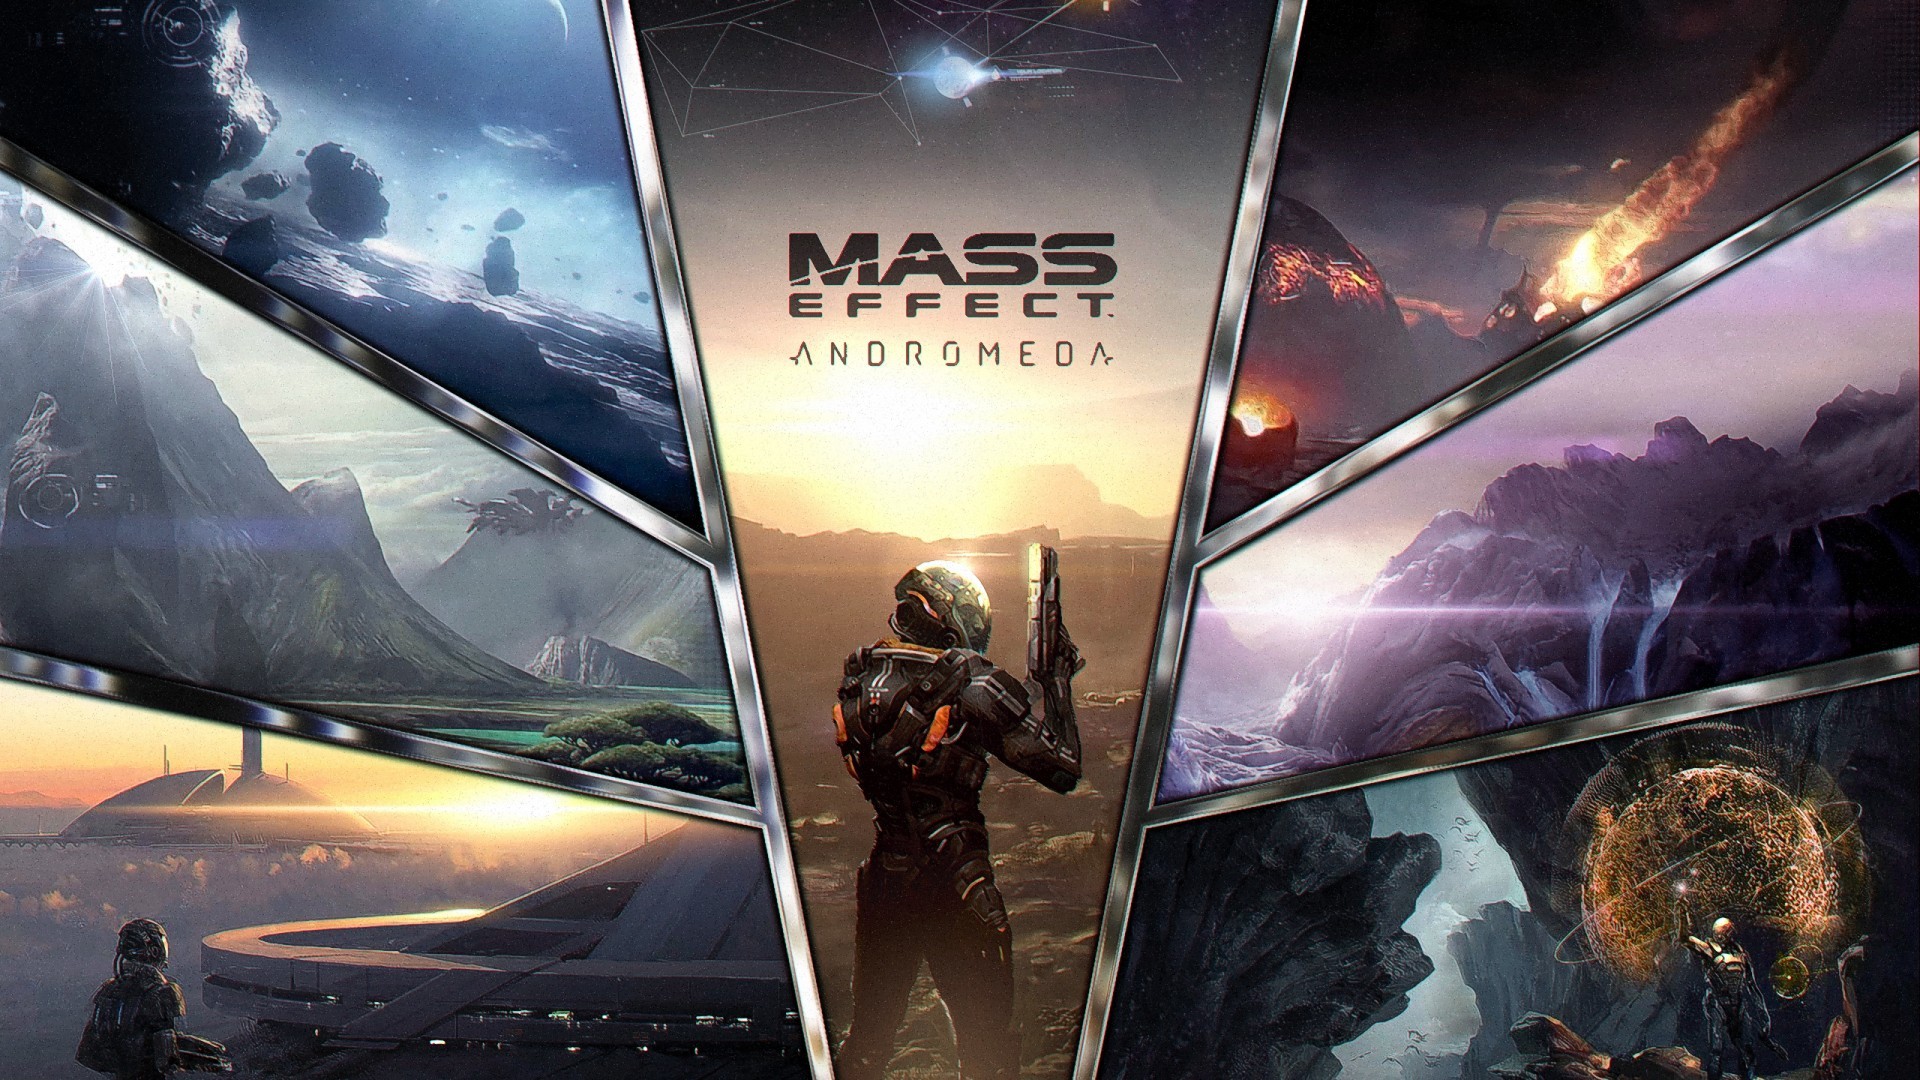 1920x1080 Wallpaper Mass Effect, Andromeda, 2017 Games, PC, PS4, Xbox, Games, #783